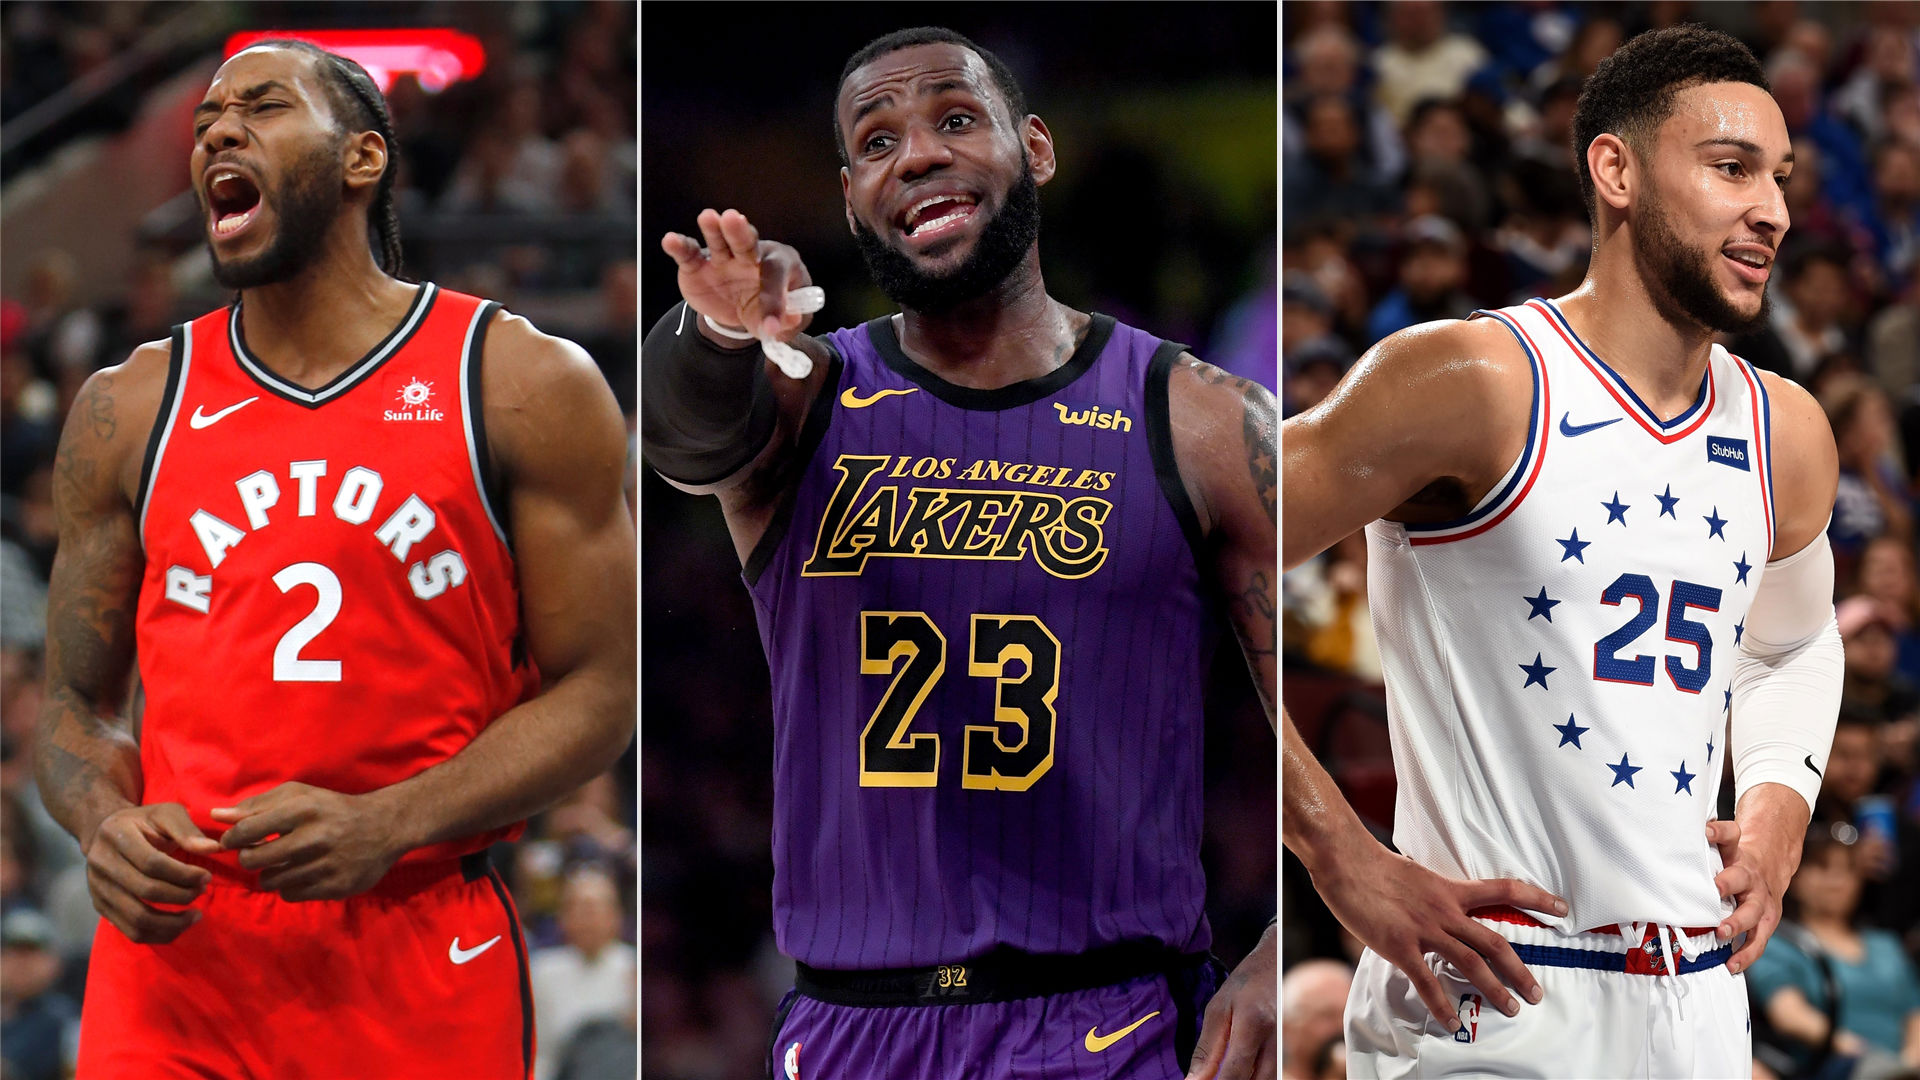 NBA All-Star Game 2019: Takeaways from the second fan vote results | Sporting News